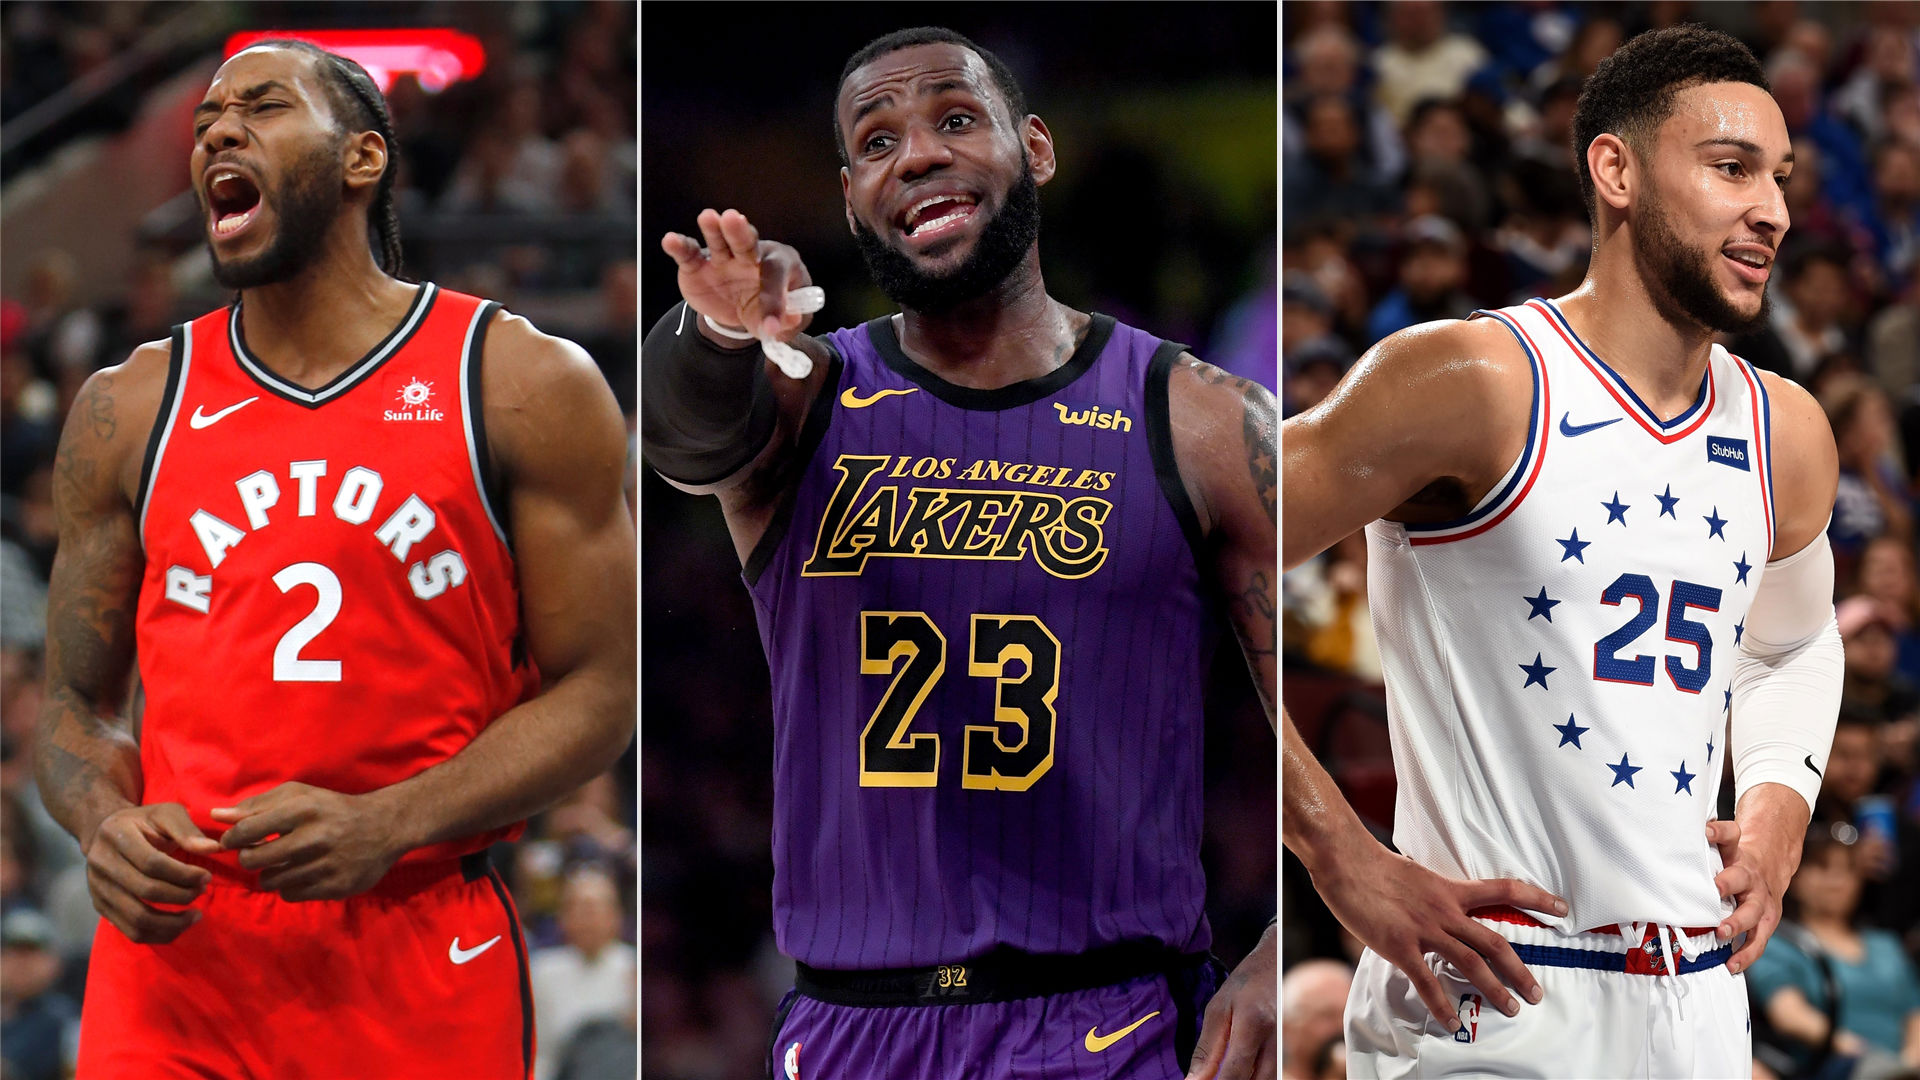 NBA All-Star Game 2019: Takeaways from the second fan vote results | Sporting News